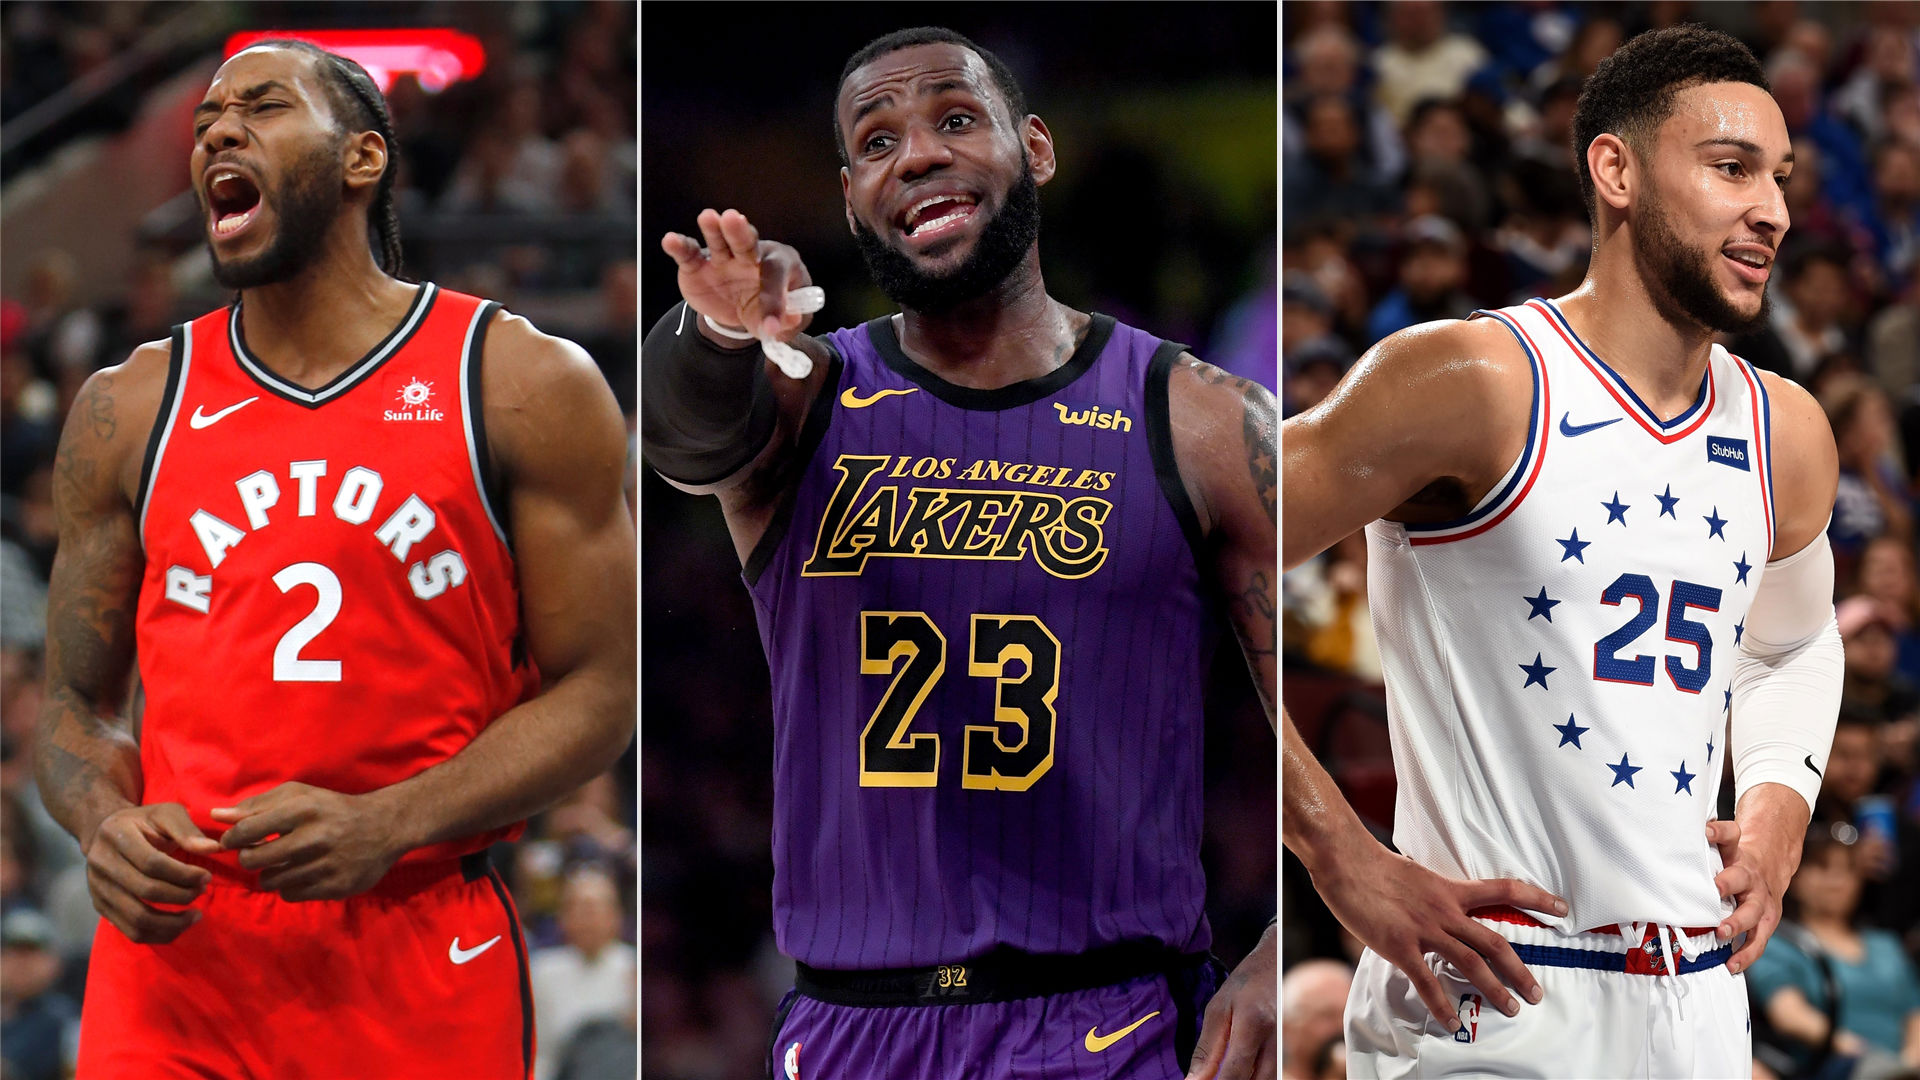 NBA All-Star Game 2019: Takeaways from the second fan vote results | Sporting News